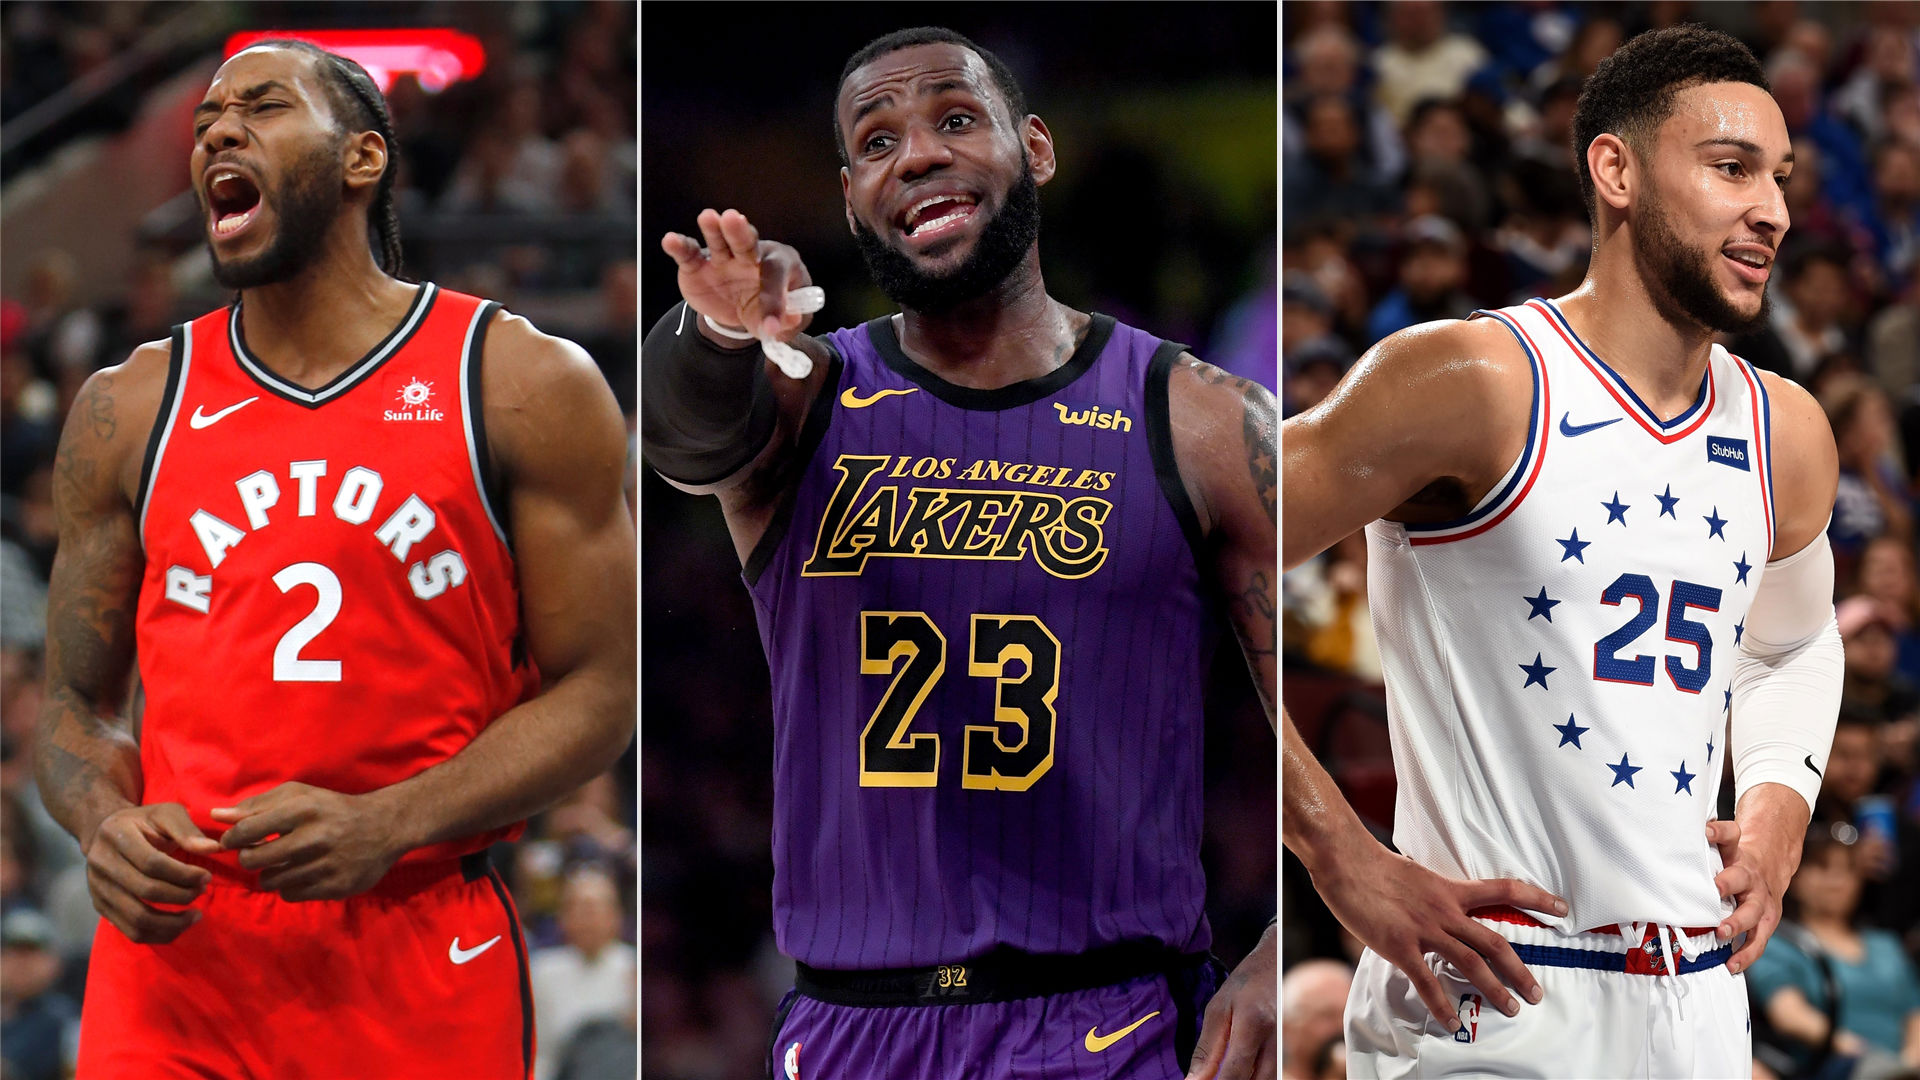 NBA All-Star Game 2019: Takeaways from the second fan vote results | Sporting News